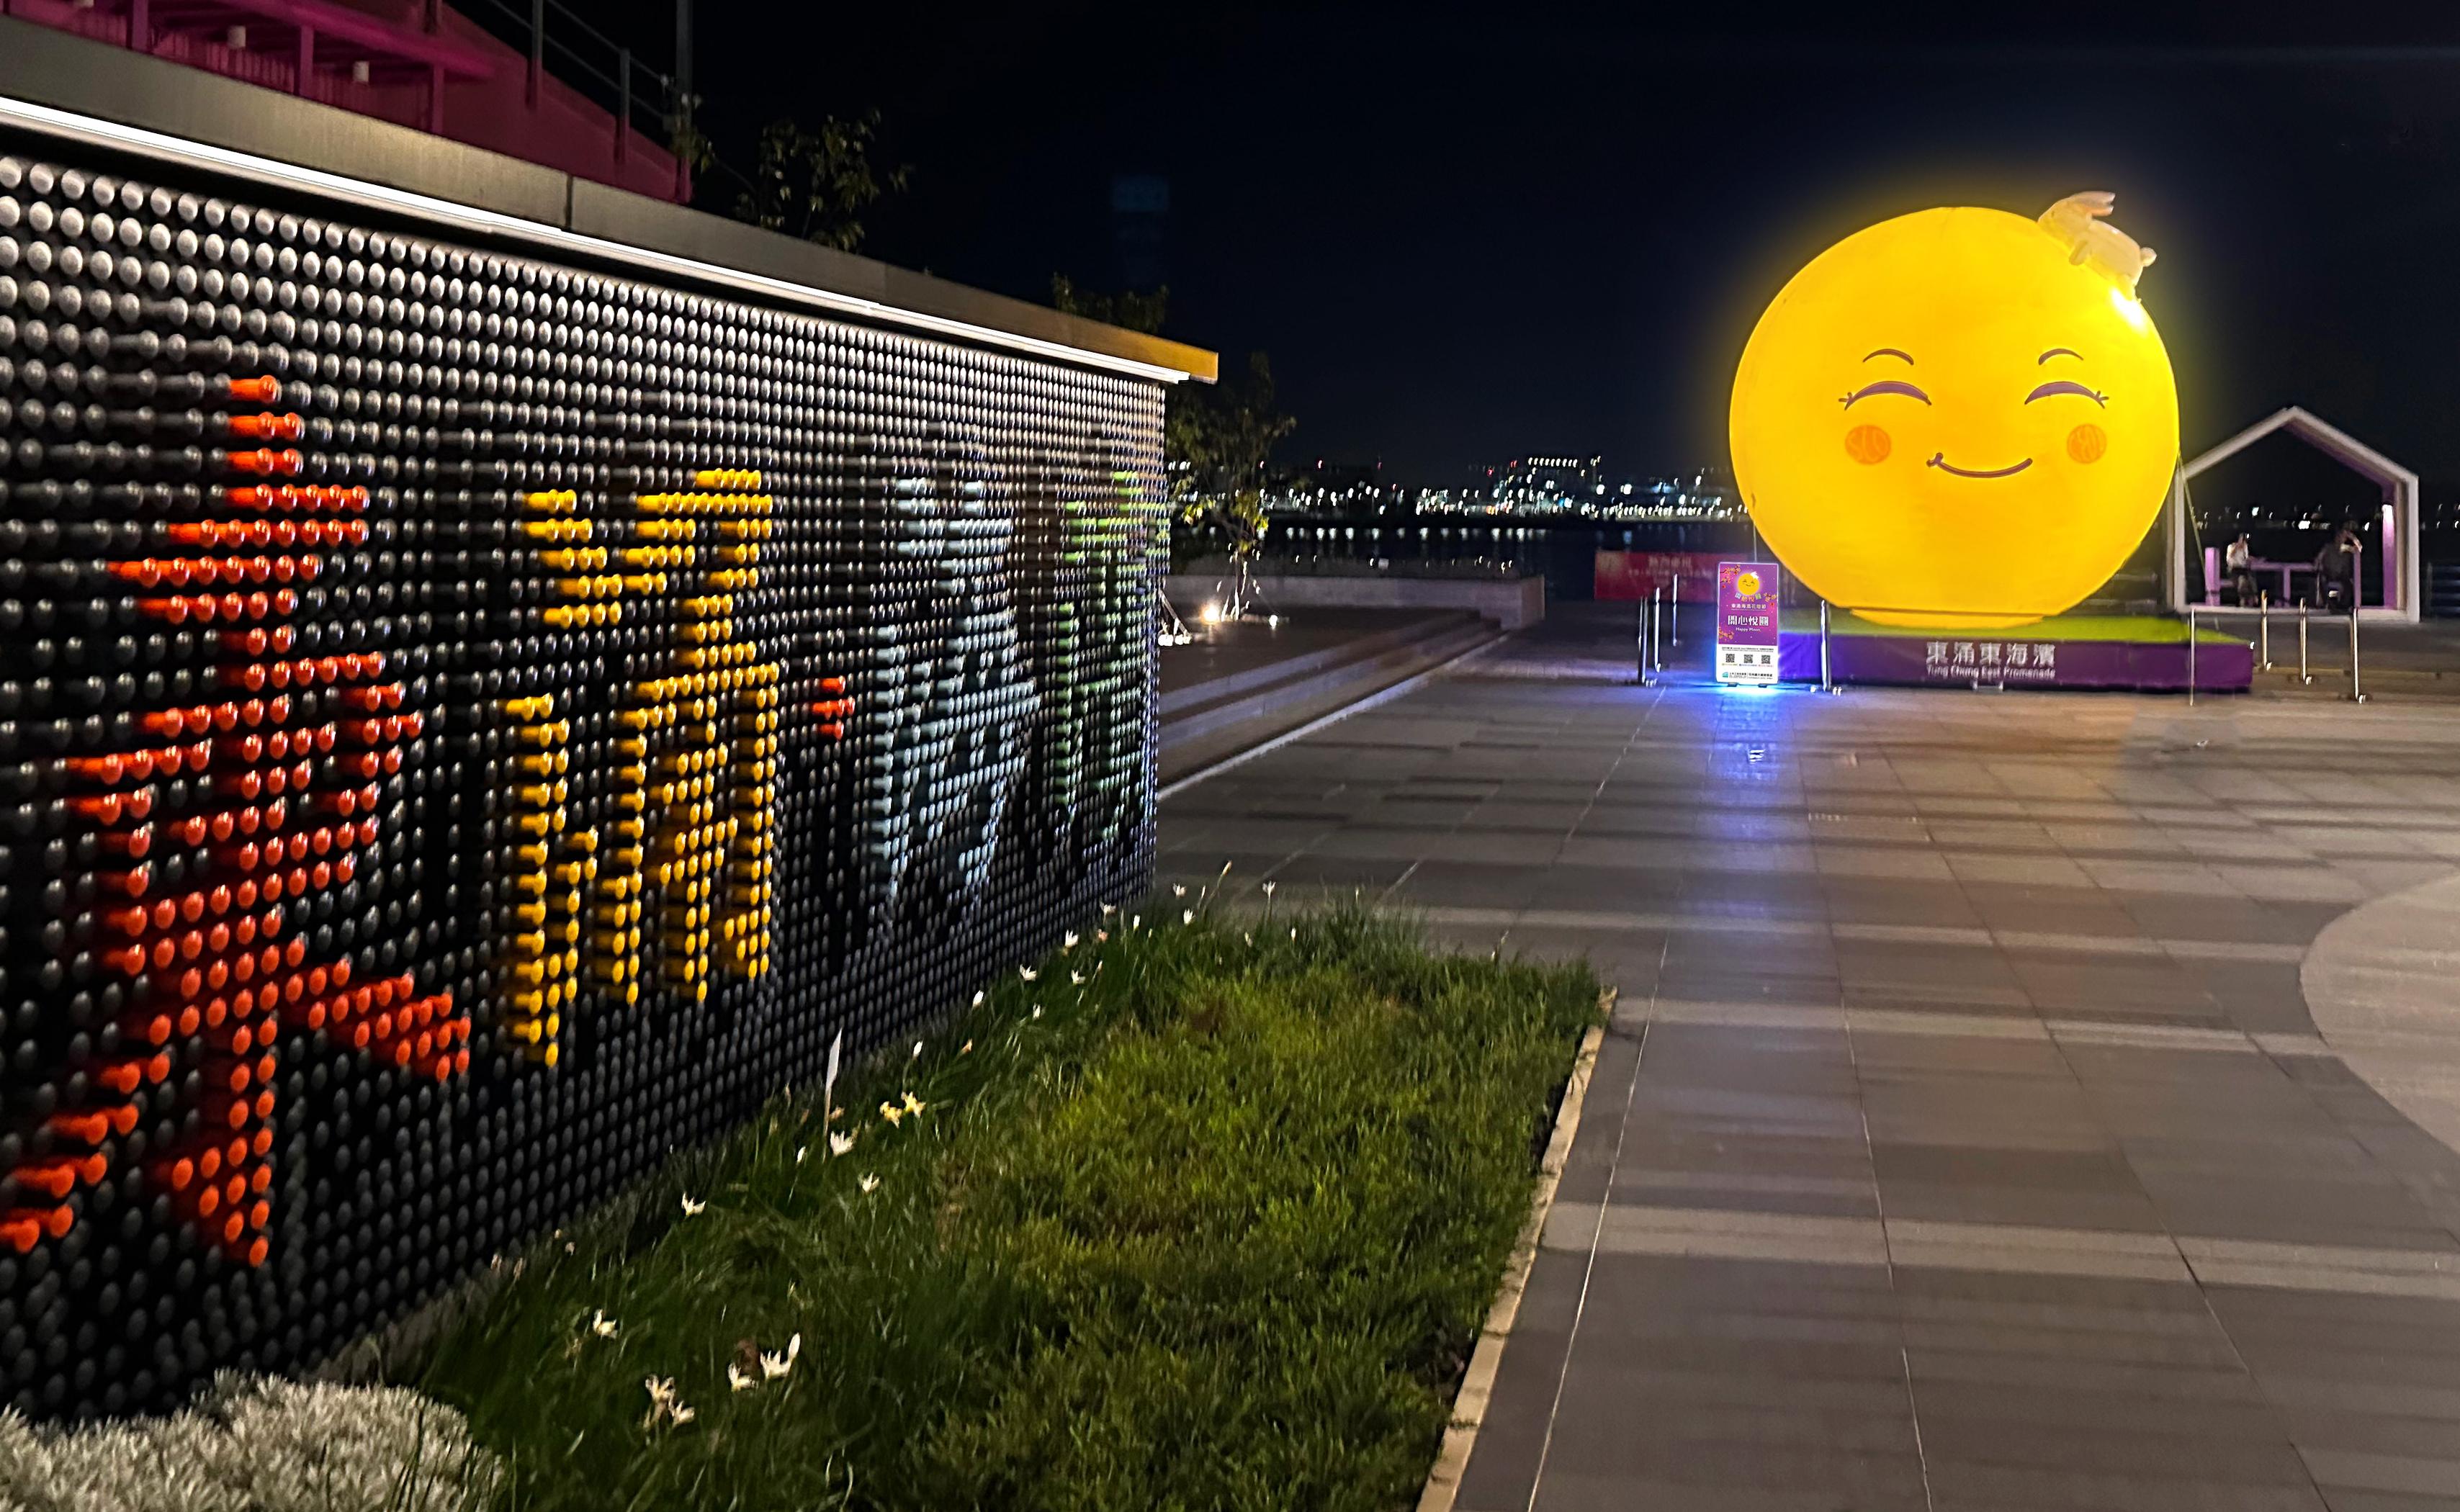 The Sustainable Lantau Office under the Civil Engineering and Development Department and the Islands District Office will organise the Happy Moon Lantern Festival at Tung Chung East Promenade from tomorrow (September 23) to October 8. Photo shows the giant "happy moon".